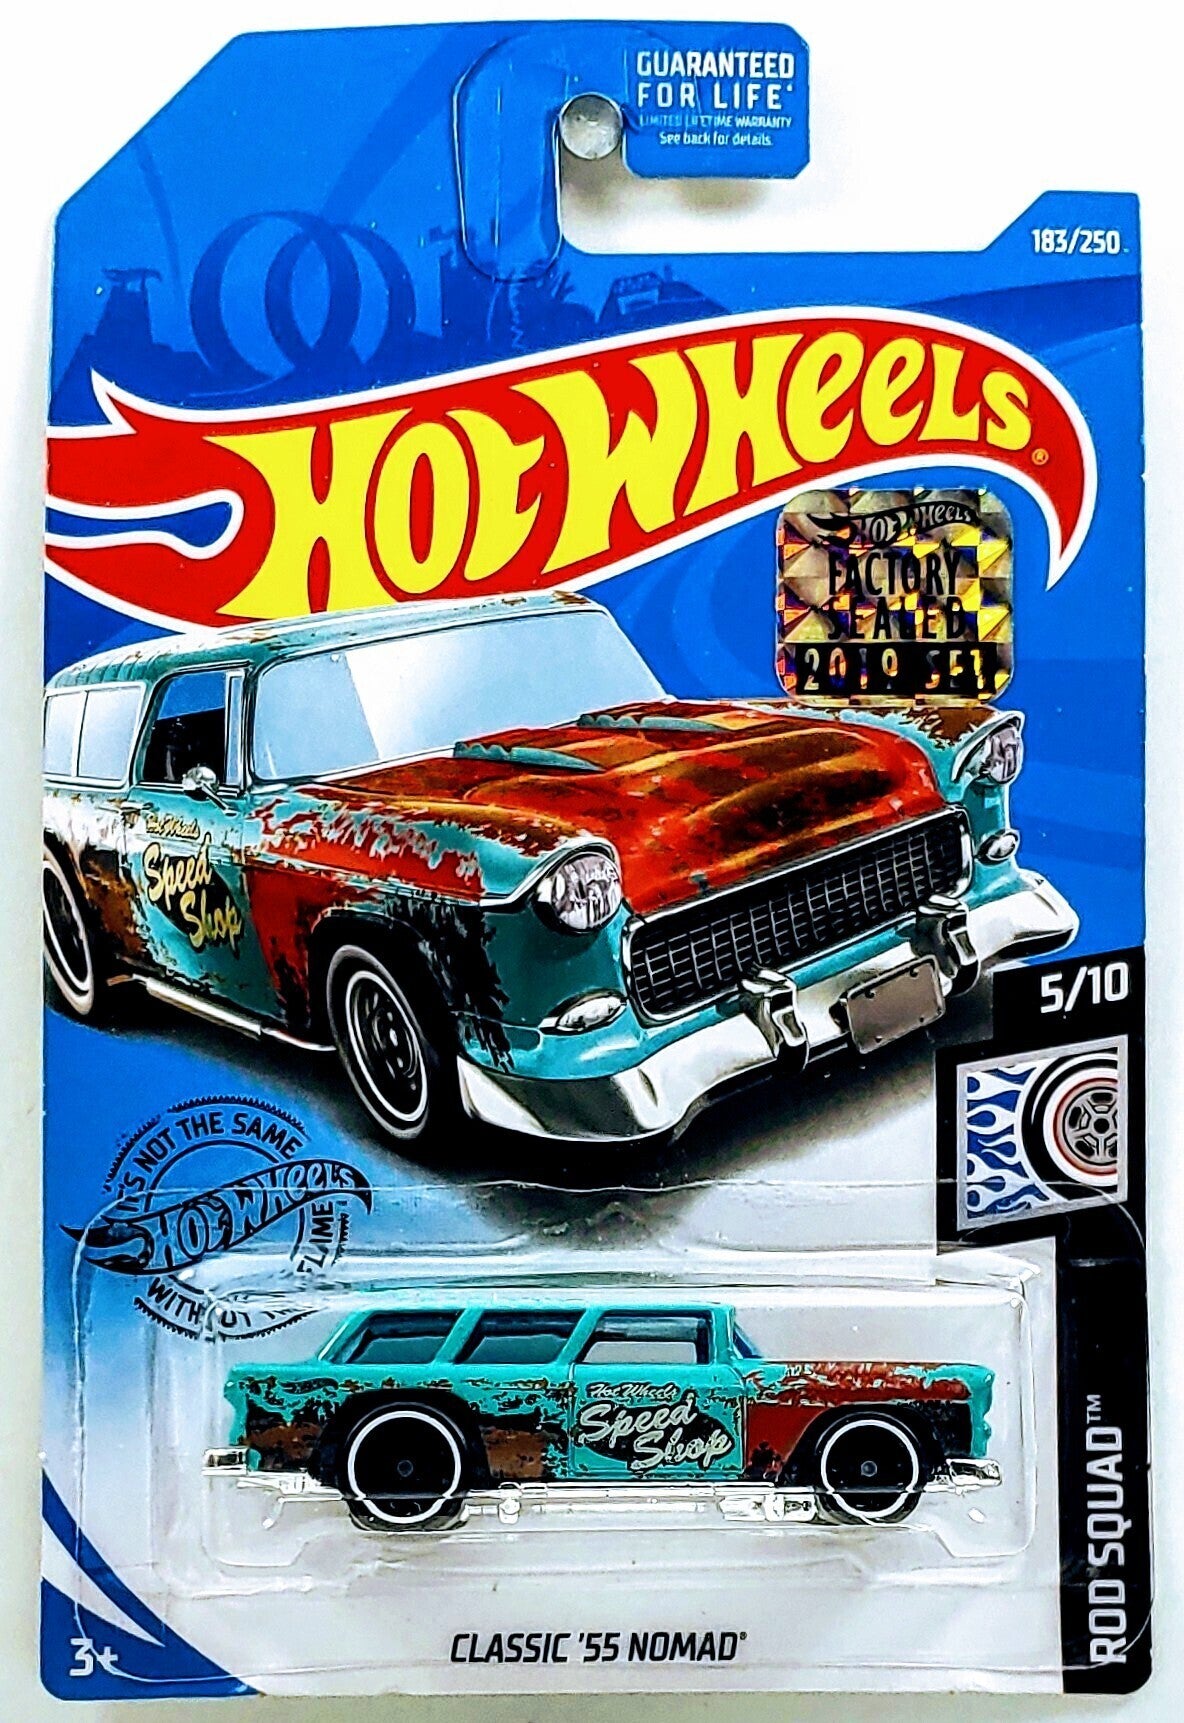 Hot Wheels 2019 - Collector # 183/250 - Classic '55 Nomad - USA Factory Sticker